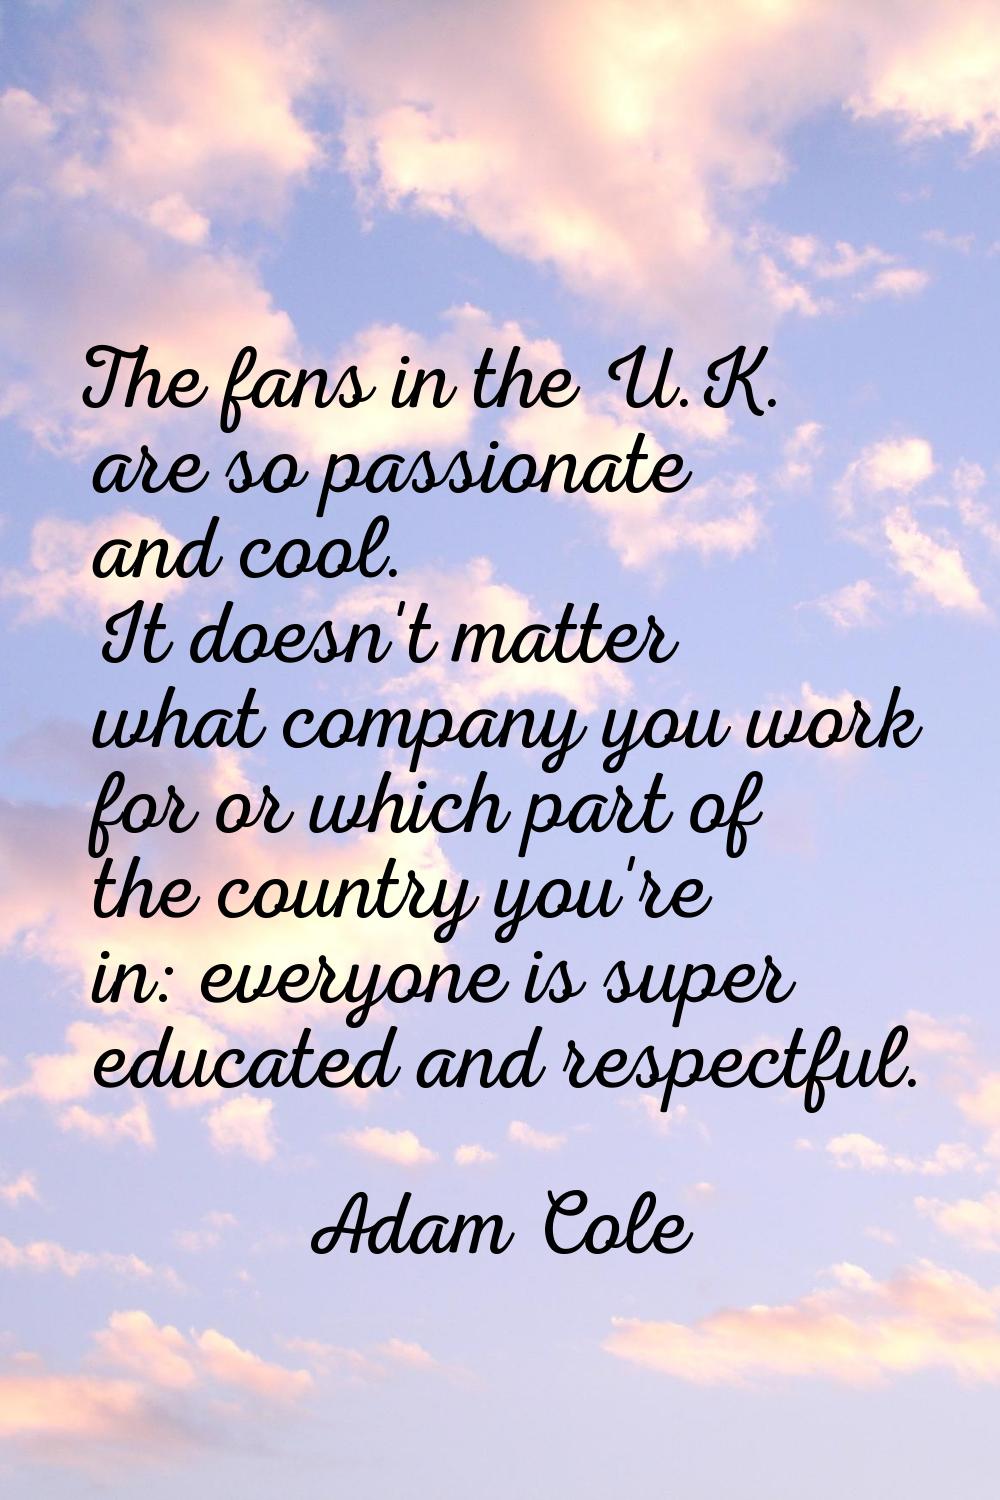 The fans in the U.K. are so passionate and cool. It doesn't matter what company you work for or whi